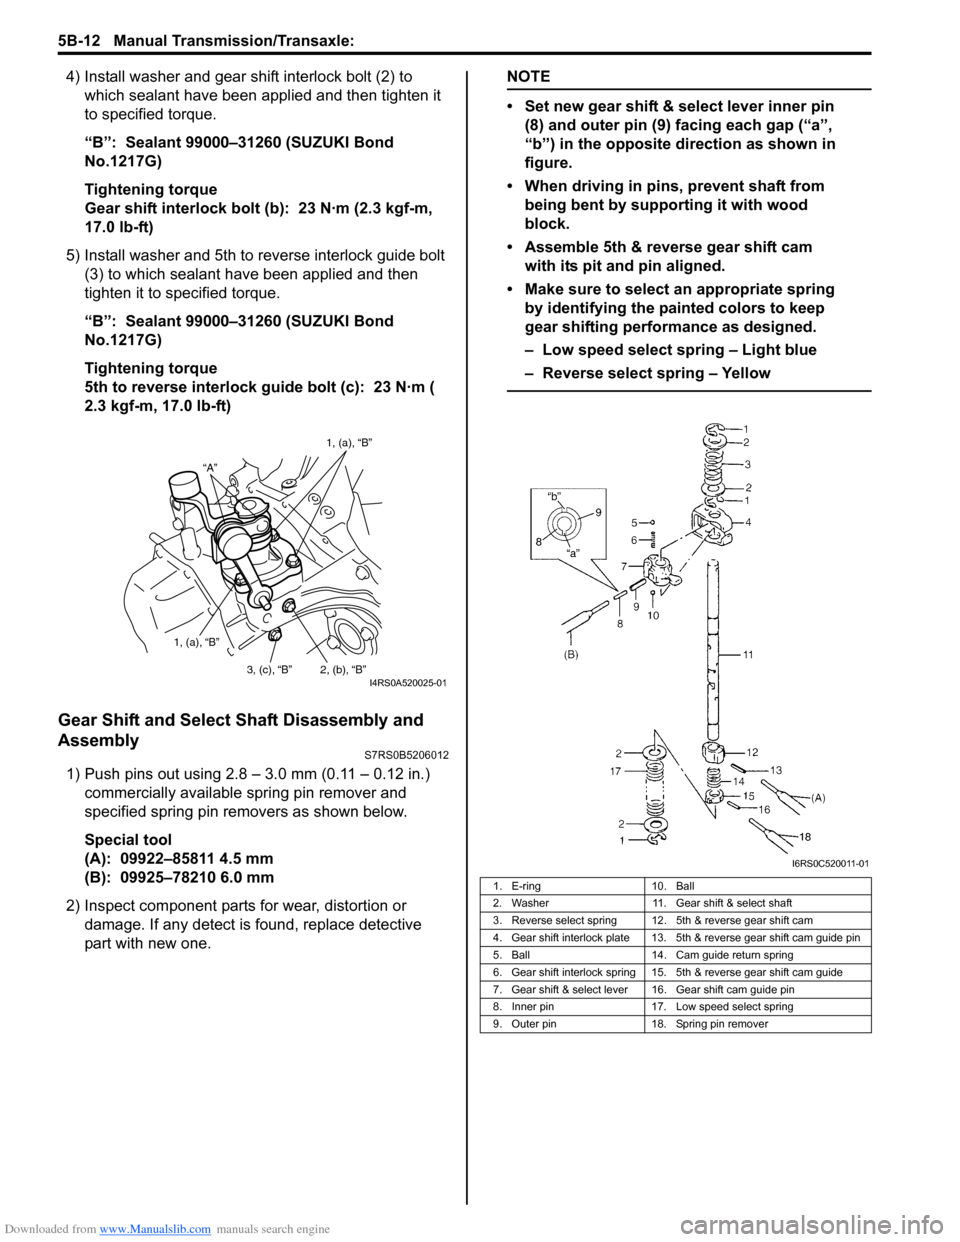 SUZUKI SWIFT 2005 2.G Service Workshop Manual Downloaded from www.Manualslib.com manuals search engine 5B-12 Manual Transmission/Transaxle: 
4) Install washer and gear shift interlock bolt (2) to which sealant have been app lied and then tighten 